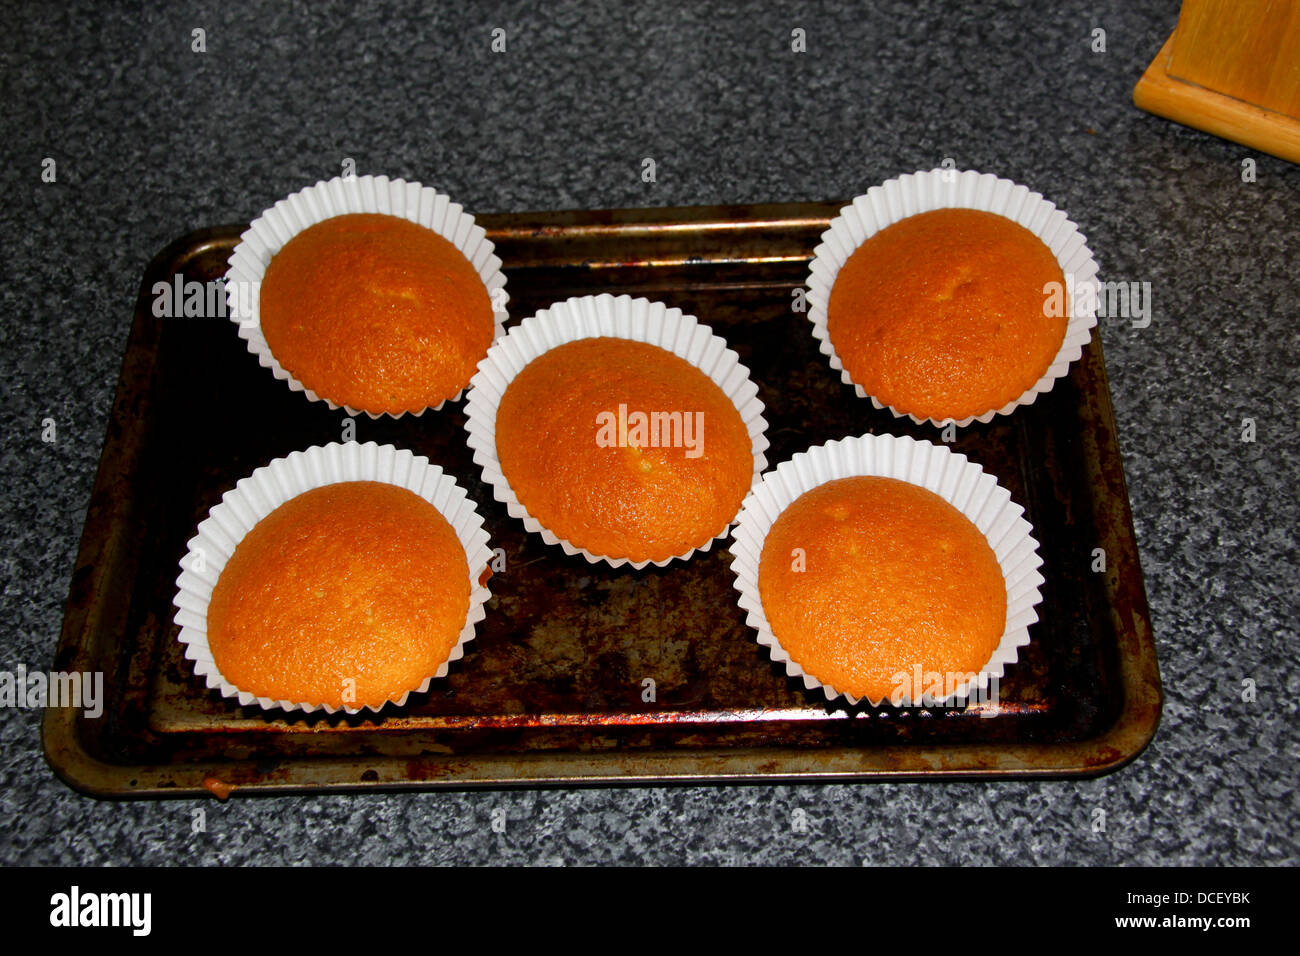 Undecorated home baked fairy cakes in cases on baking tray Stock Photo